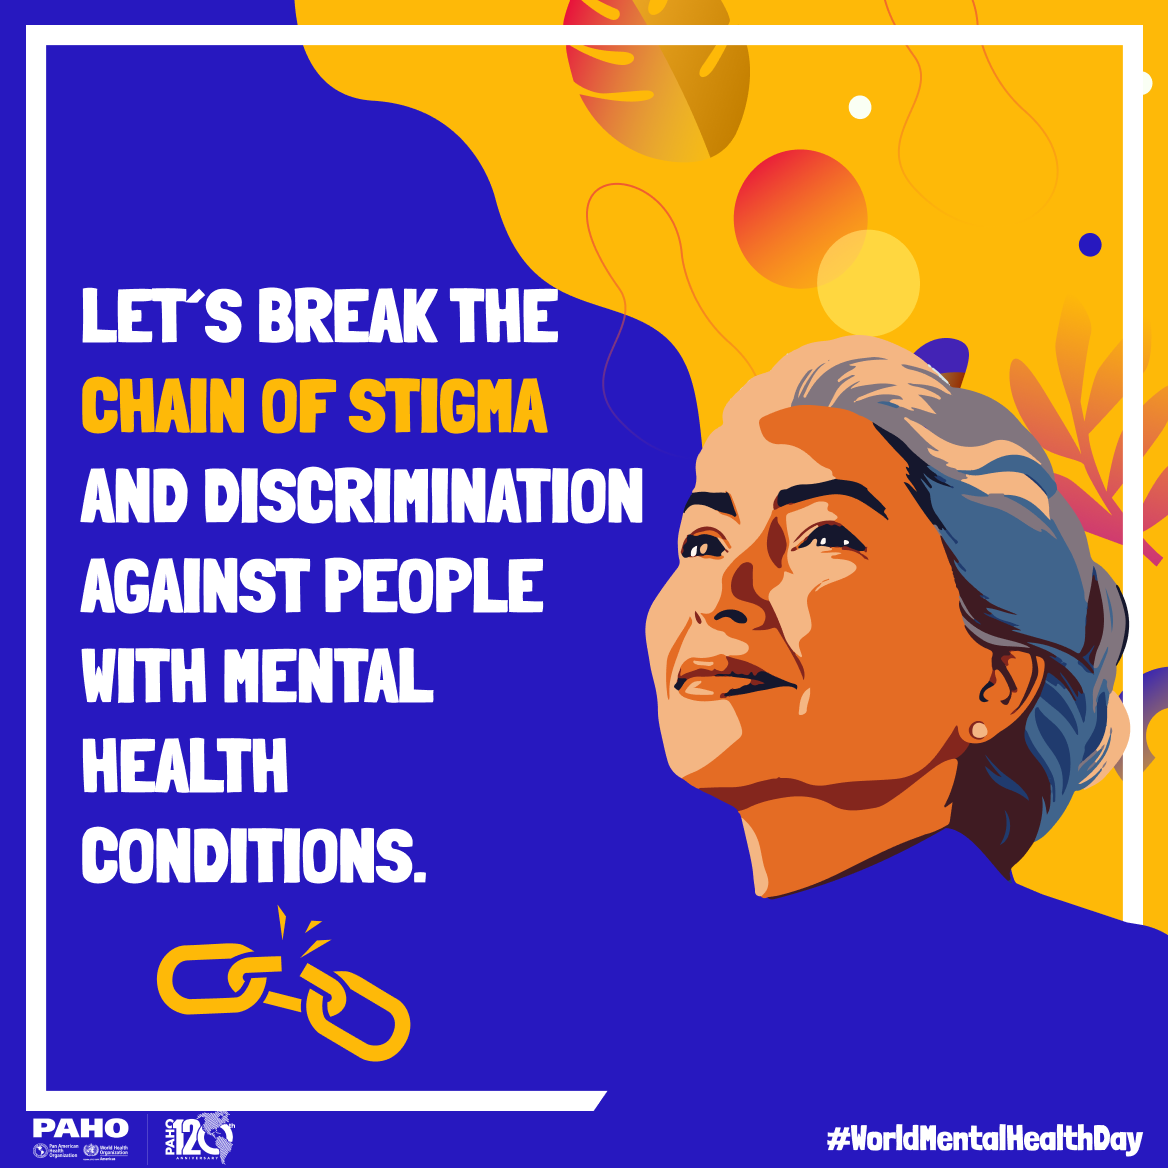 Let´s break the chain of stigma and discrimination against people with mental health conditions.